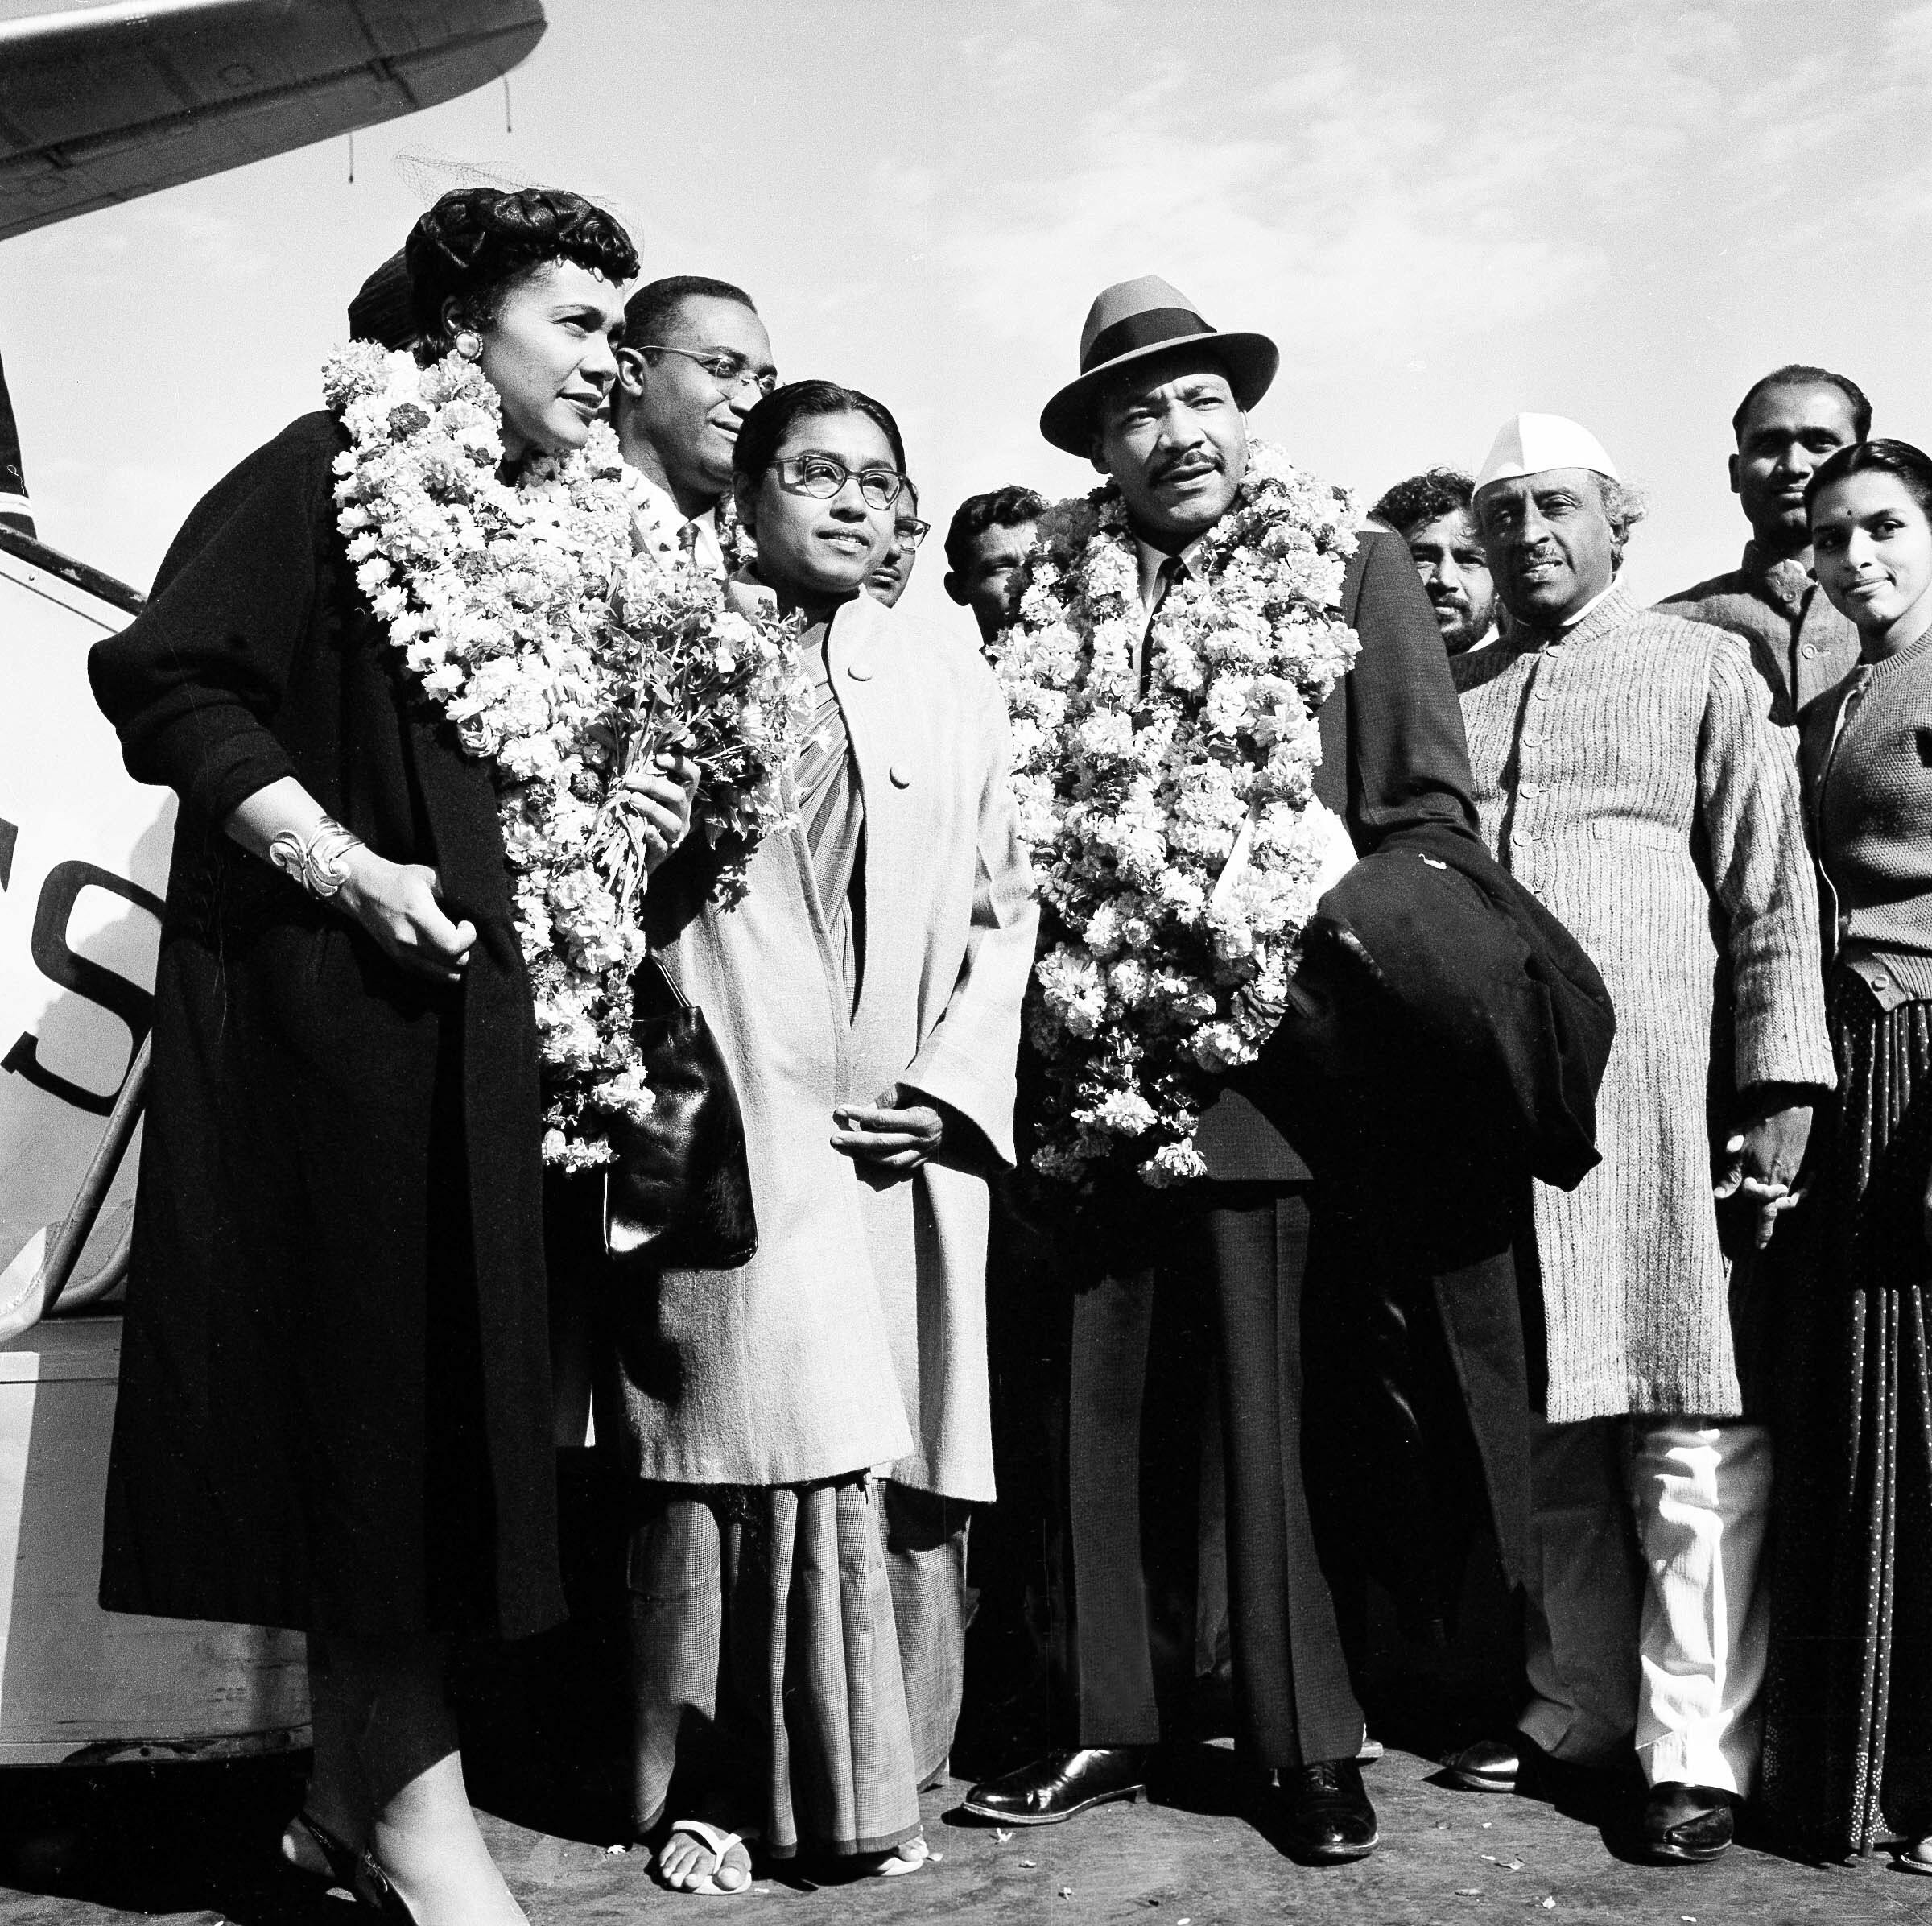 American civil rights leader Rev. Dr. Martin Luther King, Jr. and his wife Coretta, both wearing garlands, are received by admirers after landing at the airport in New Delhi, India, Feb. 10, 1959. King, who is known in the U.S. as the American Gandhi, flew to India on what he calls a "four-week pilgrimage in India which to me means Mahatma Gandhi." (AP Photo/Rangaswamy Satakopan)